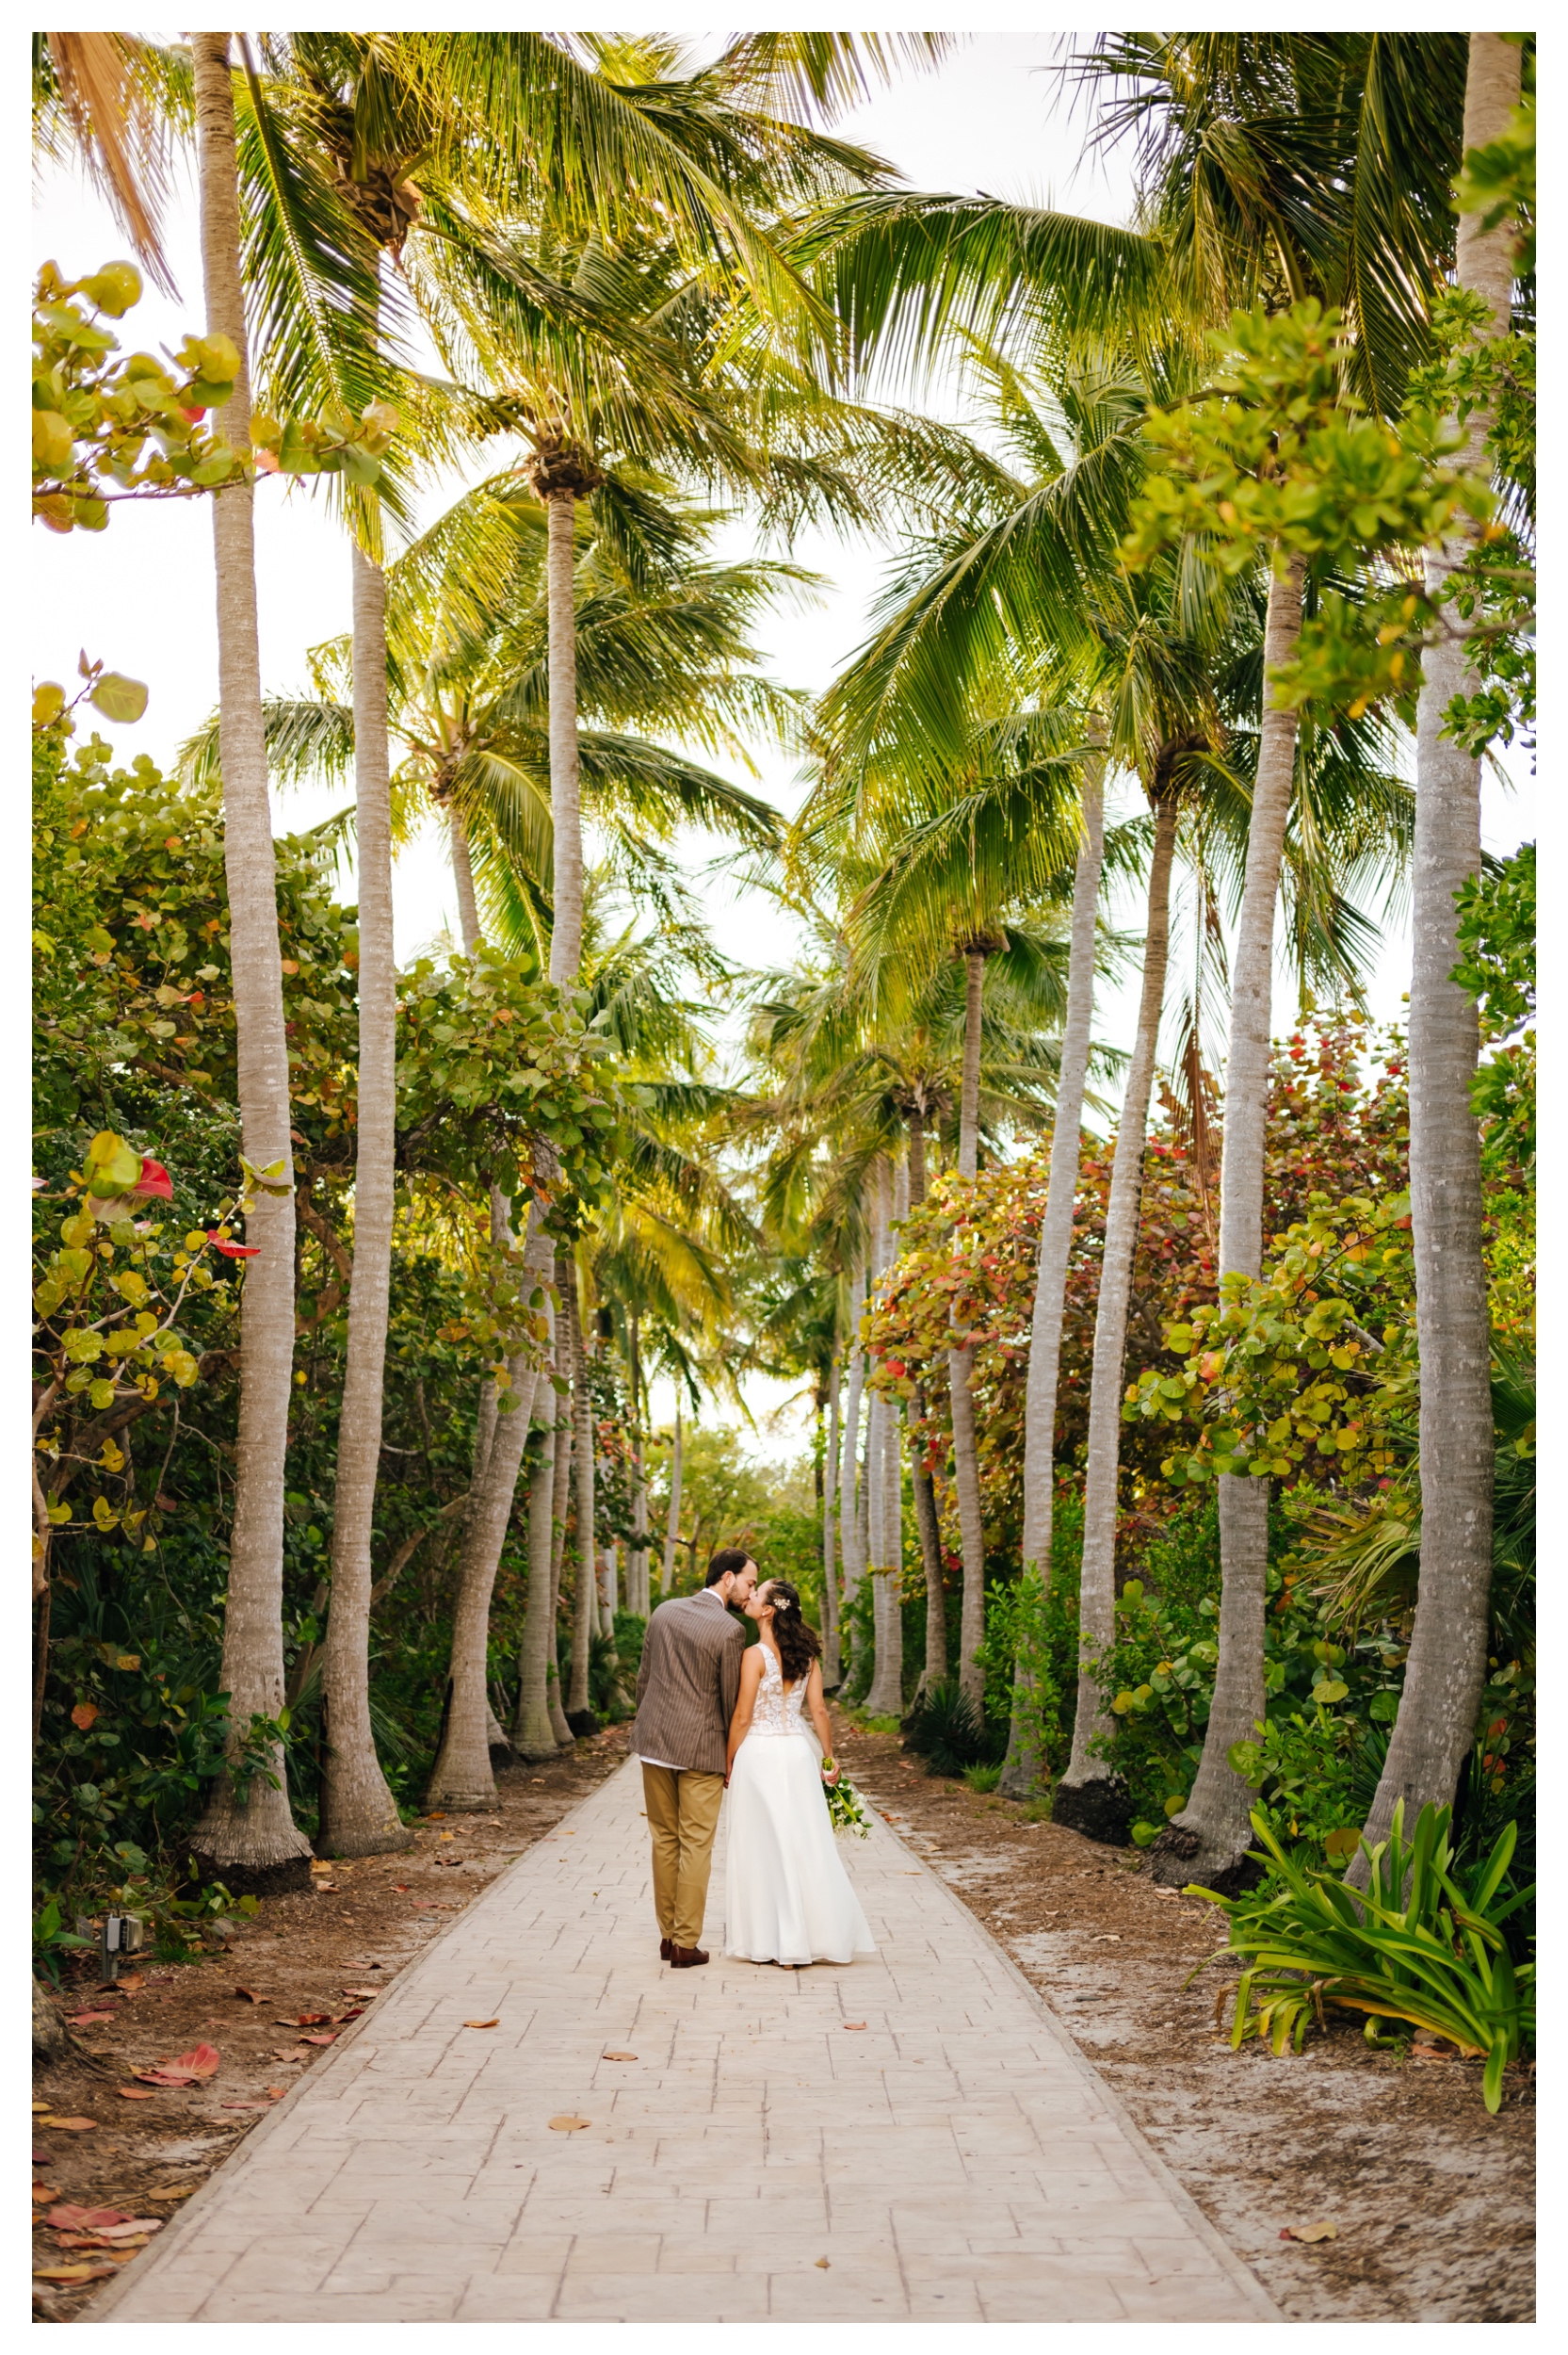 A married couple share a kiss in a palm tree grove